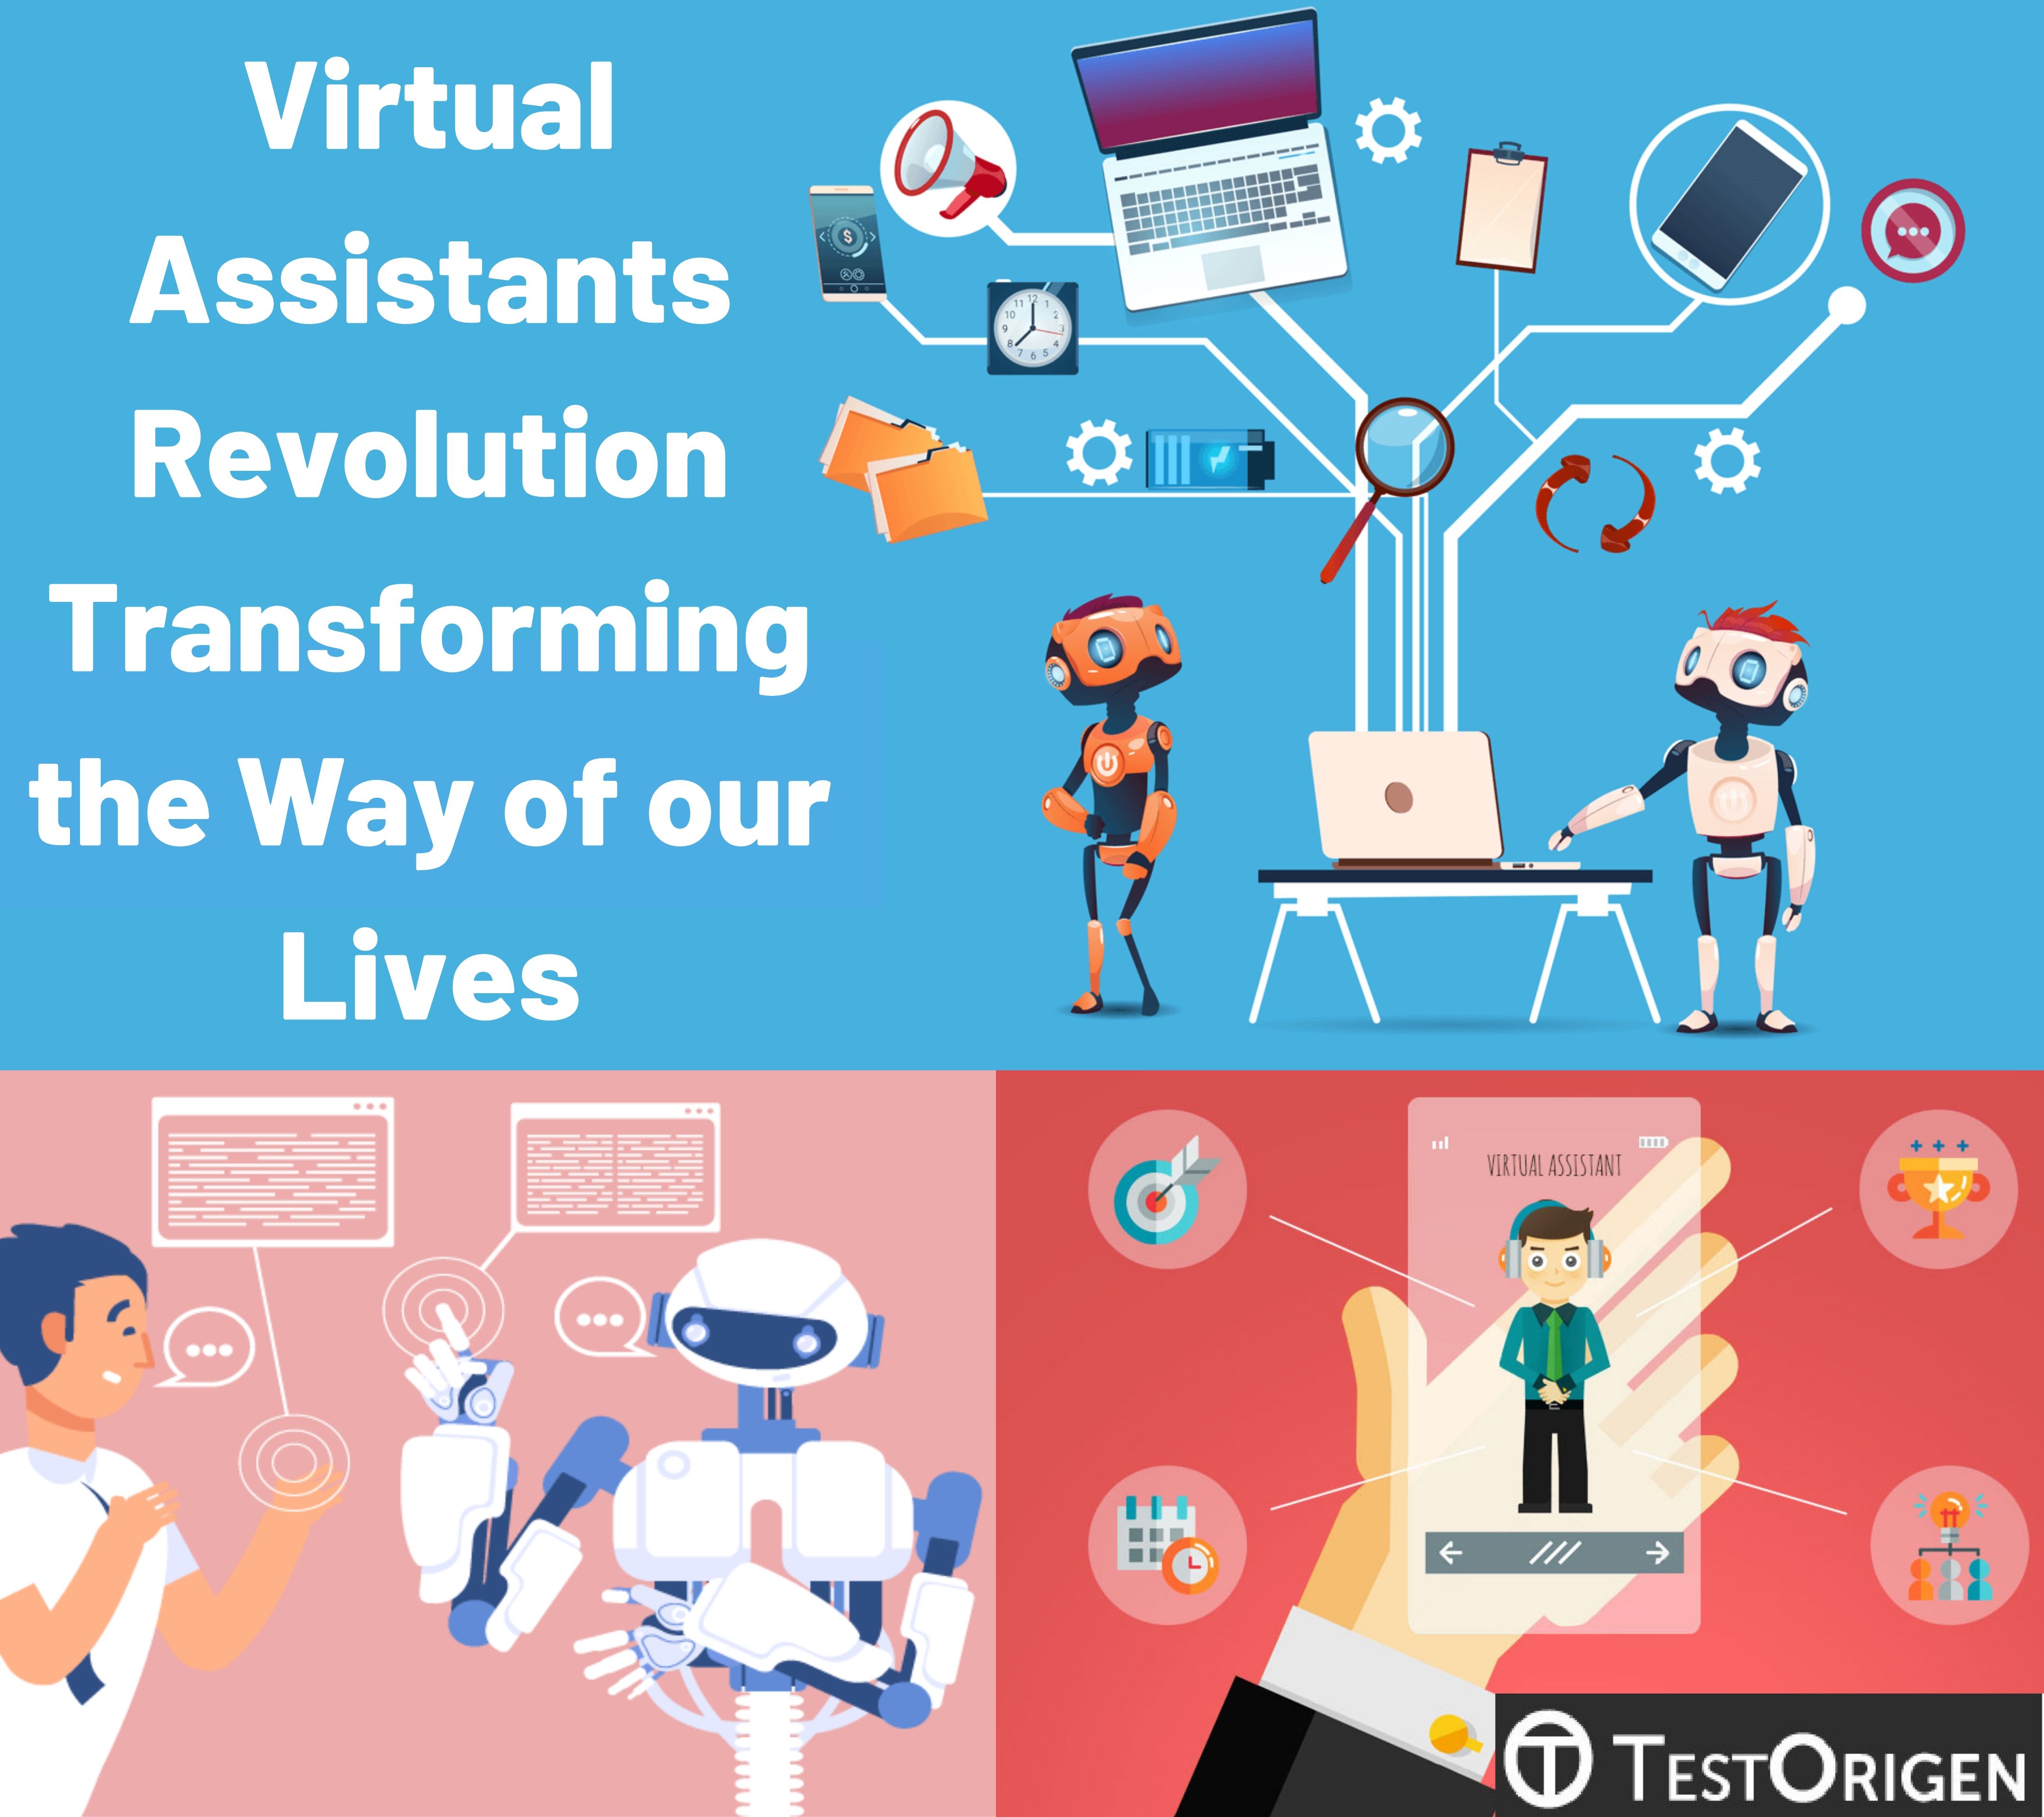 Virtual Assistants Revolution Transforming the Way of our Lives